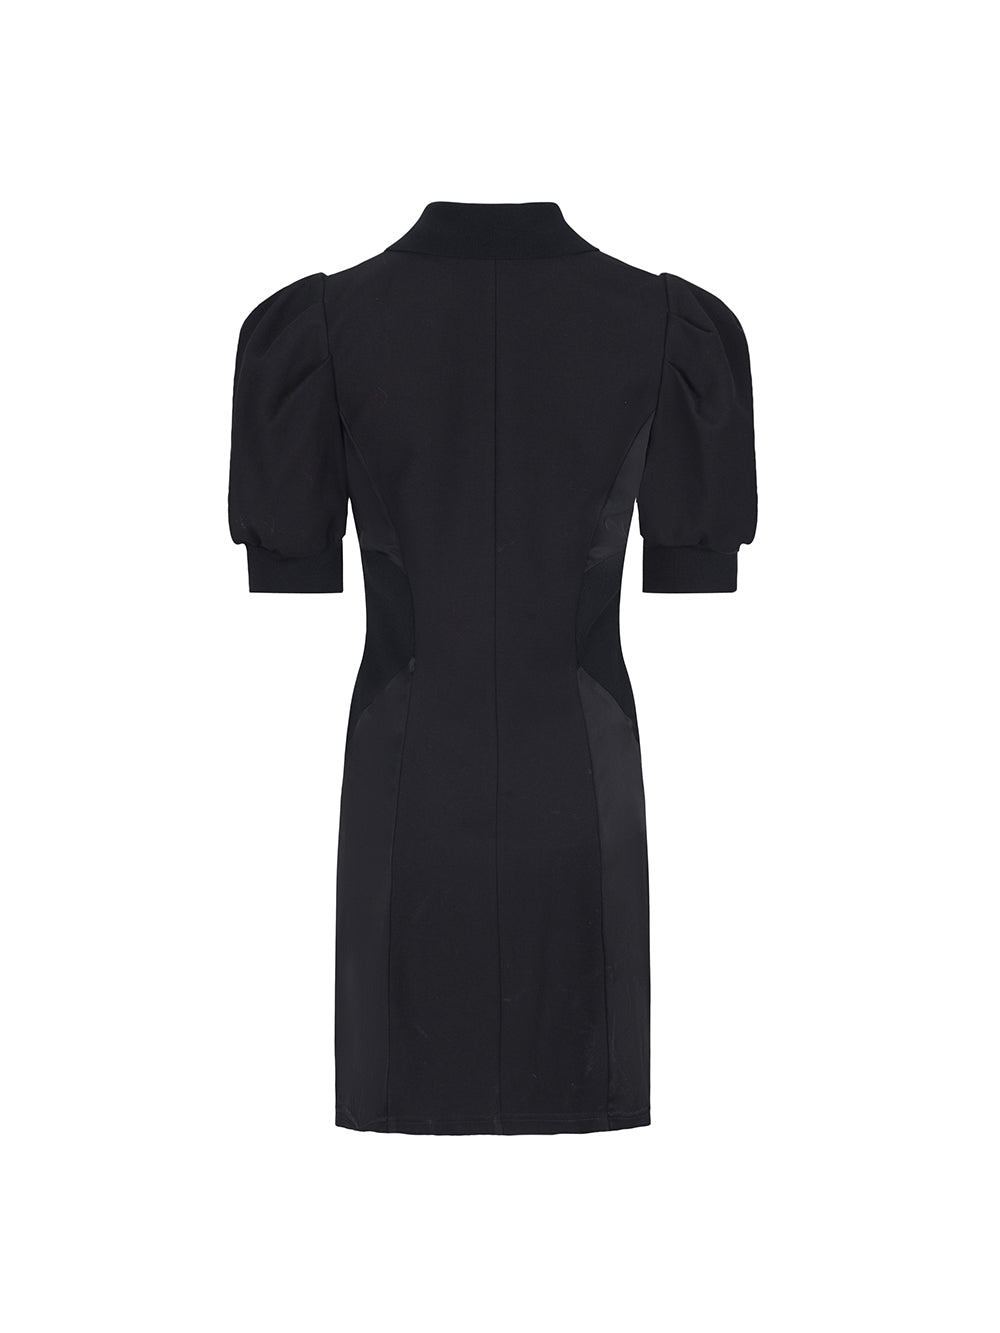 MUKZIN POLO Neck Panelled Casual Dress